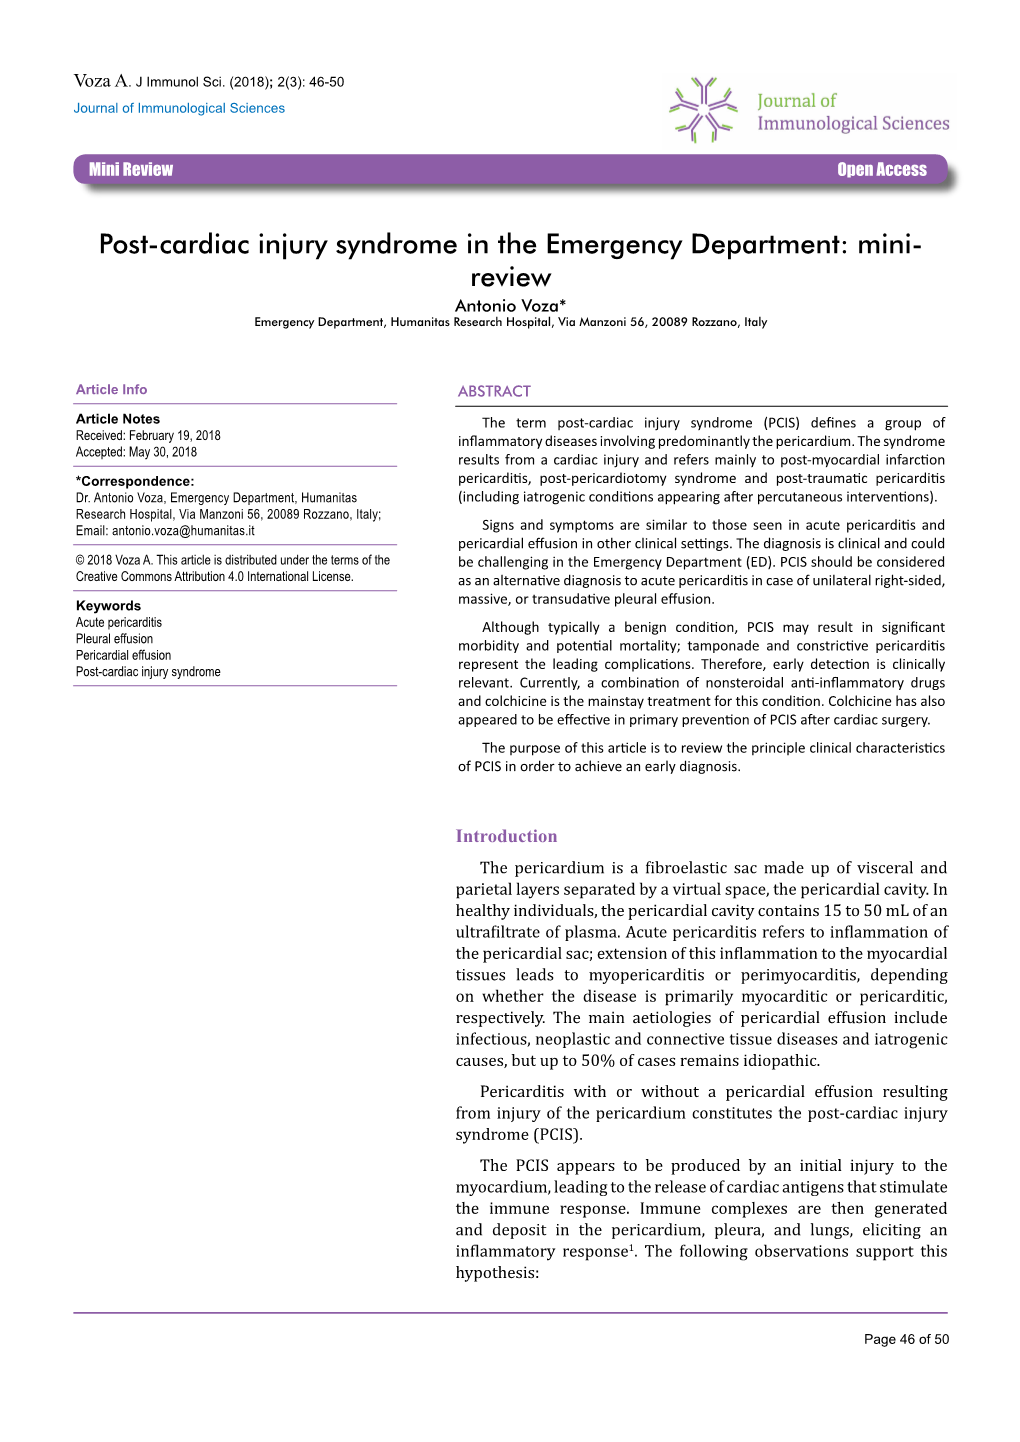 Post-Cardiac Injury Syndrome in the Emergency Department